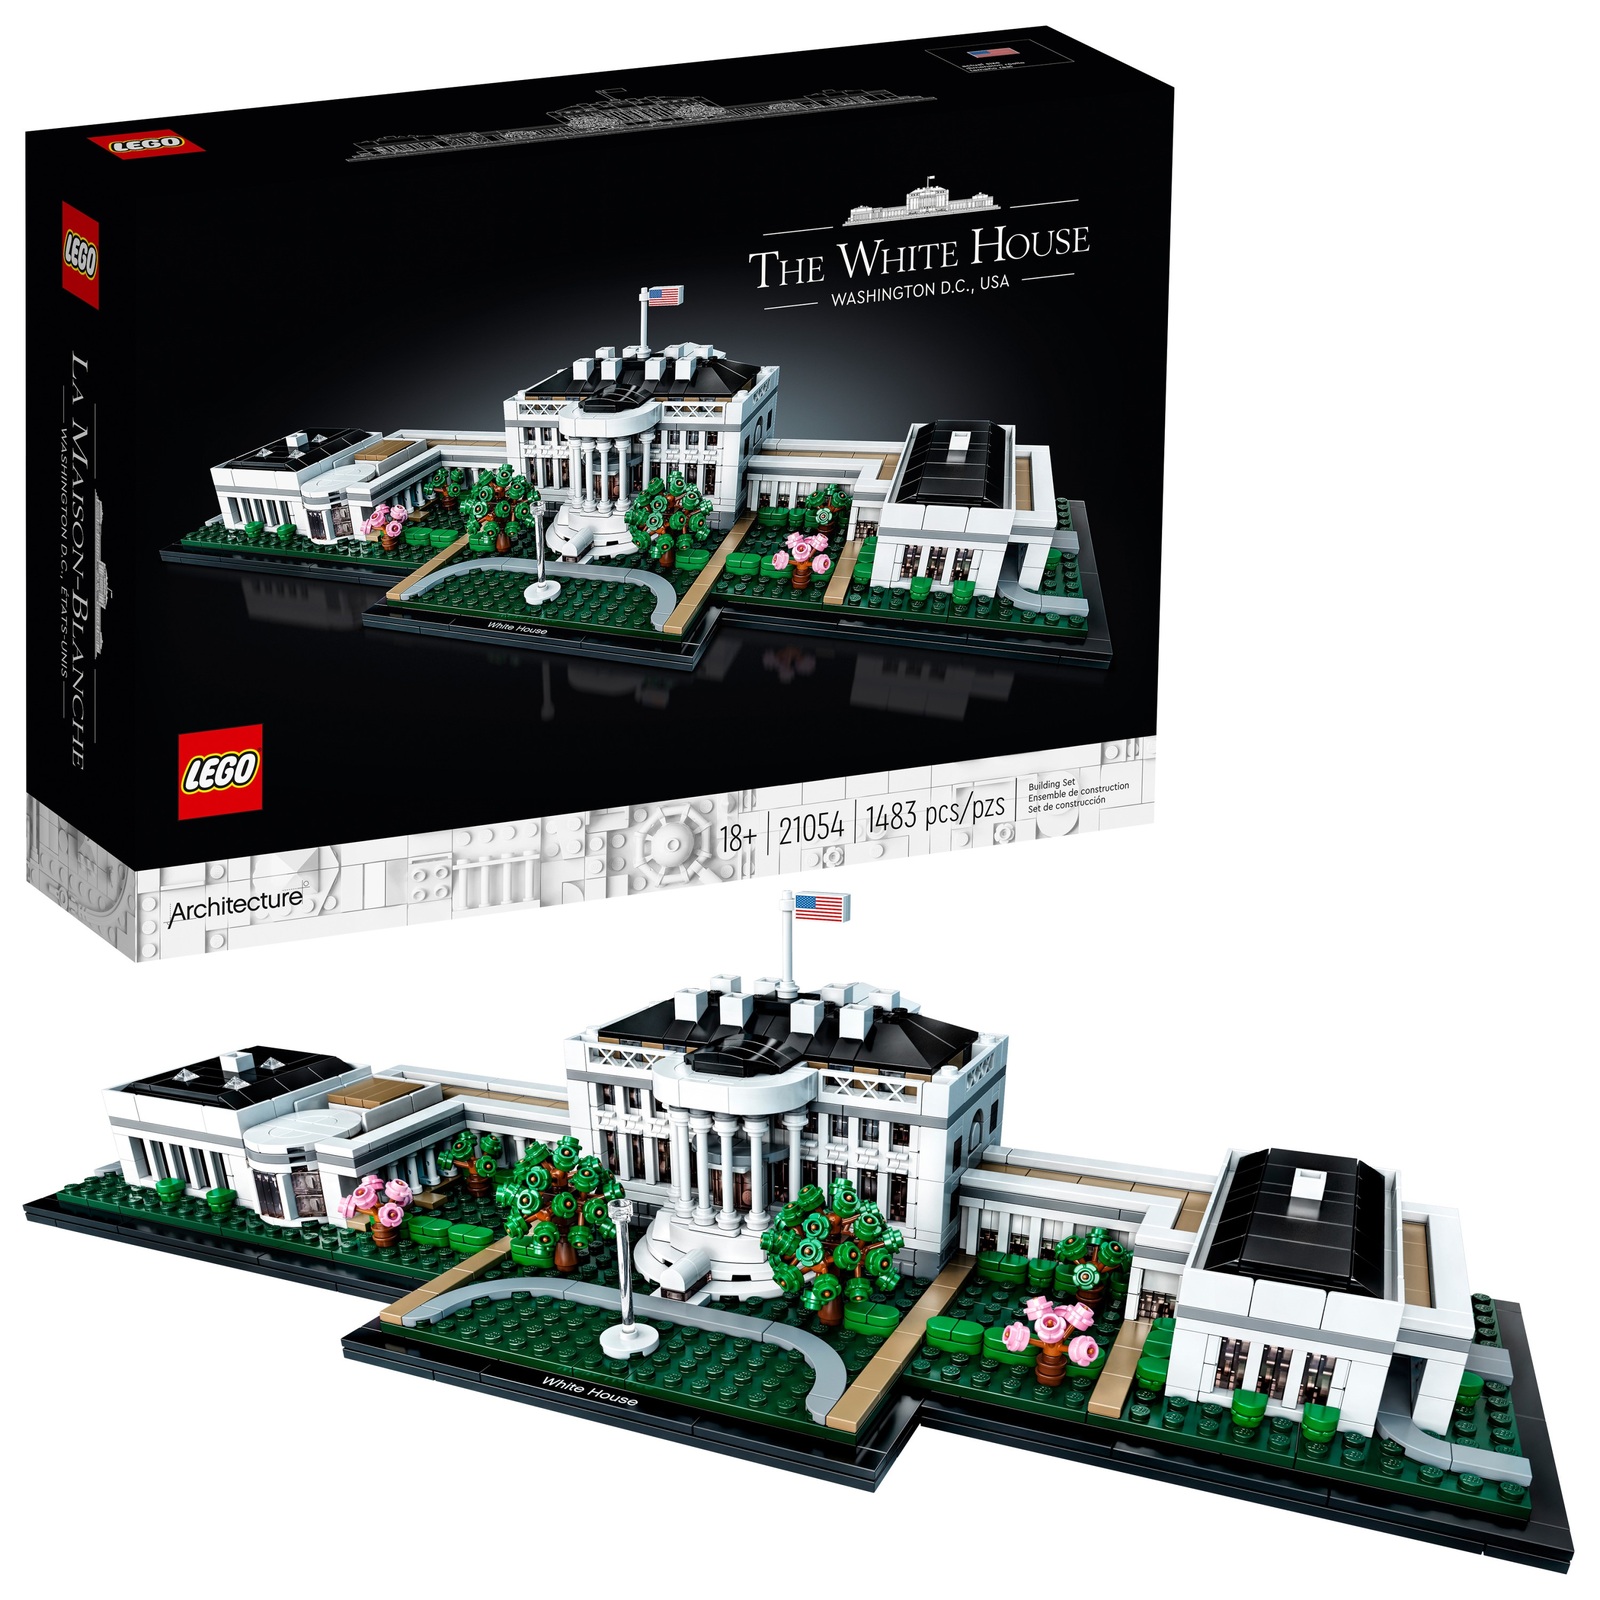 LEGO Architecture Collection The White House 21054 Building Set (1,483 Pieces)